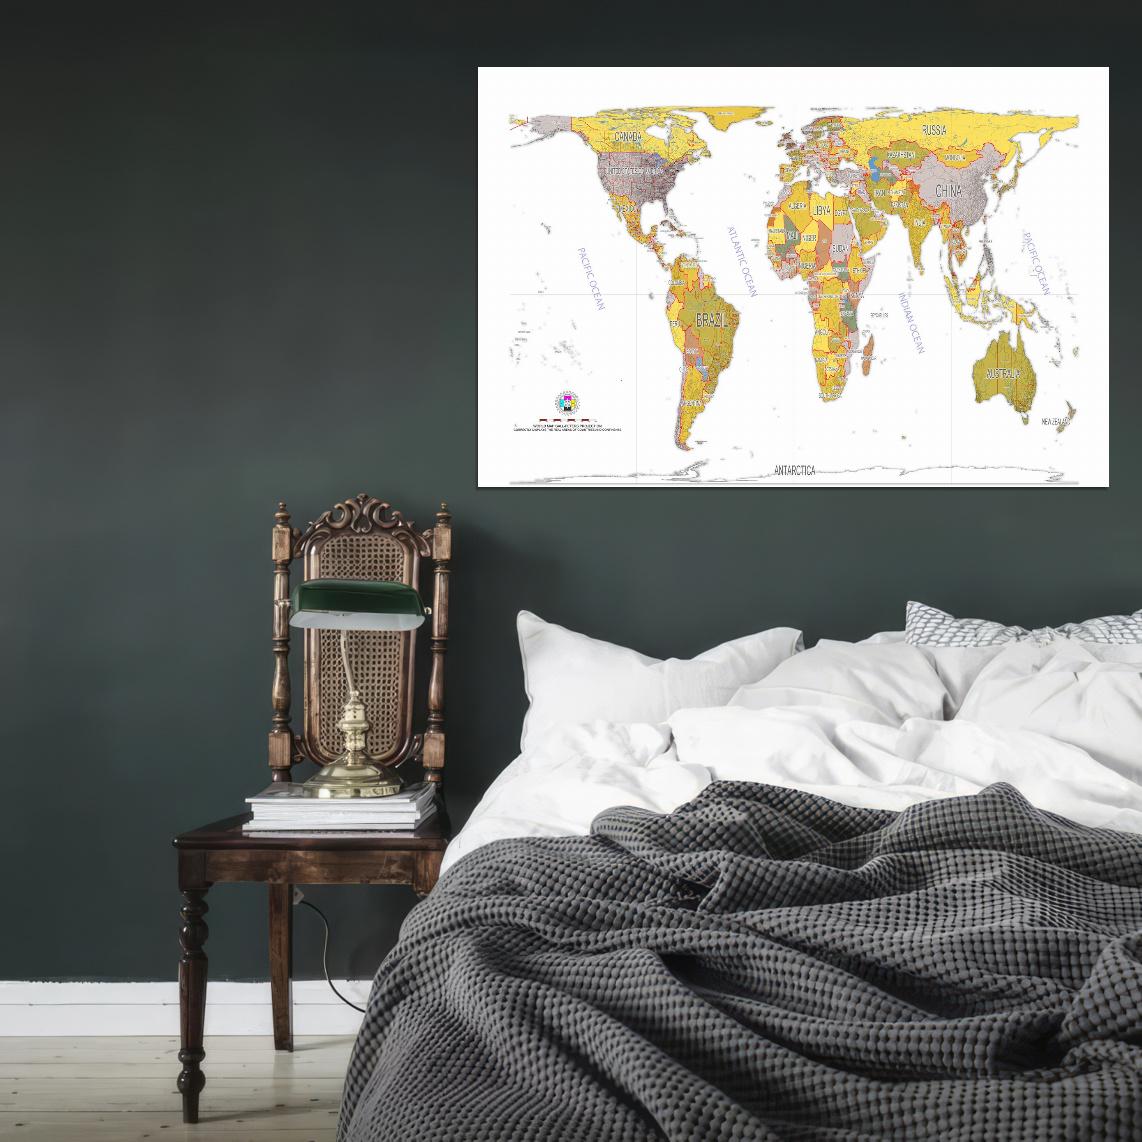 World Map Gall Peters Projection Detailed Country Names Colors Interactive Print Poster For Wall Mapology Vintage Topographic Atlas Travel Map Сlassroom School